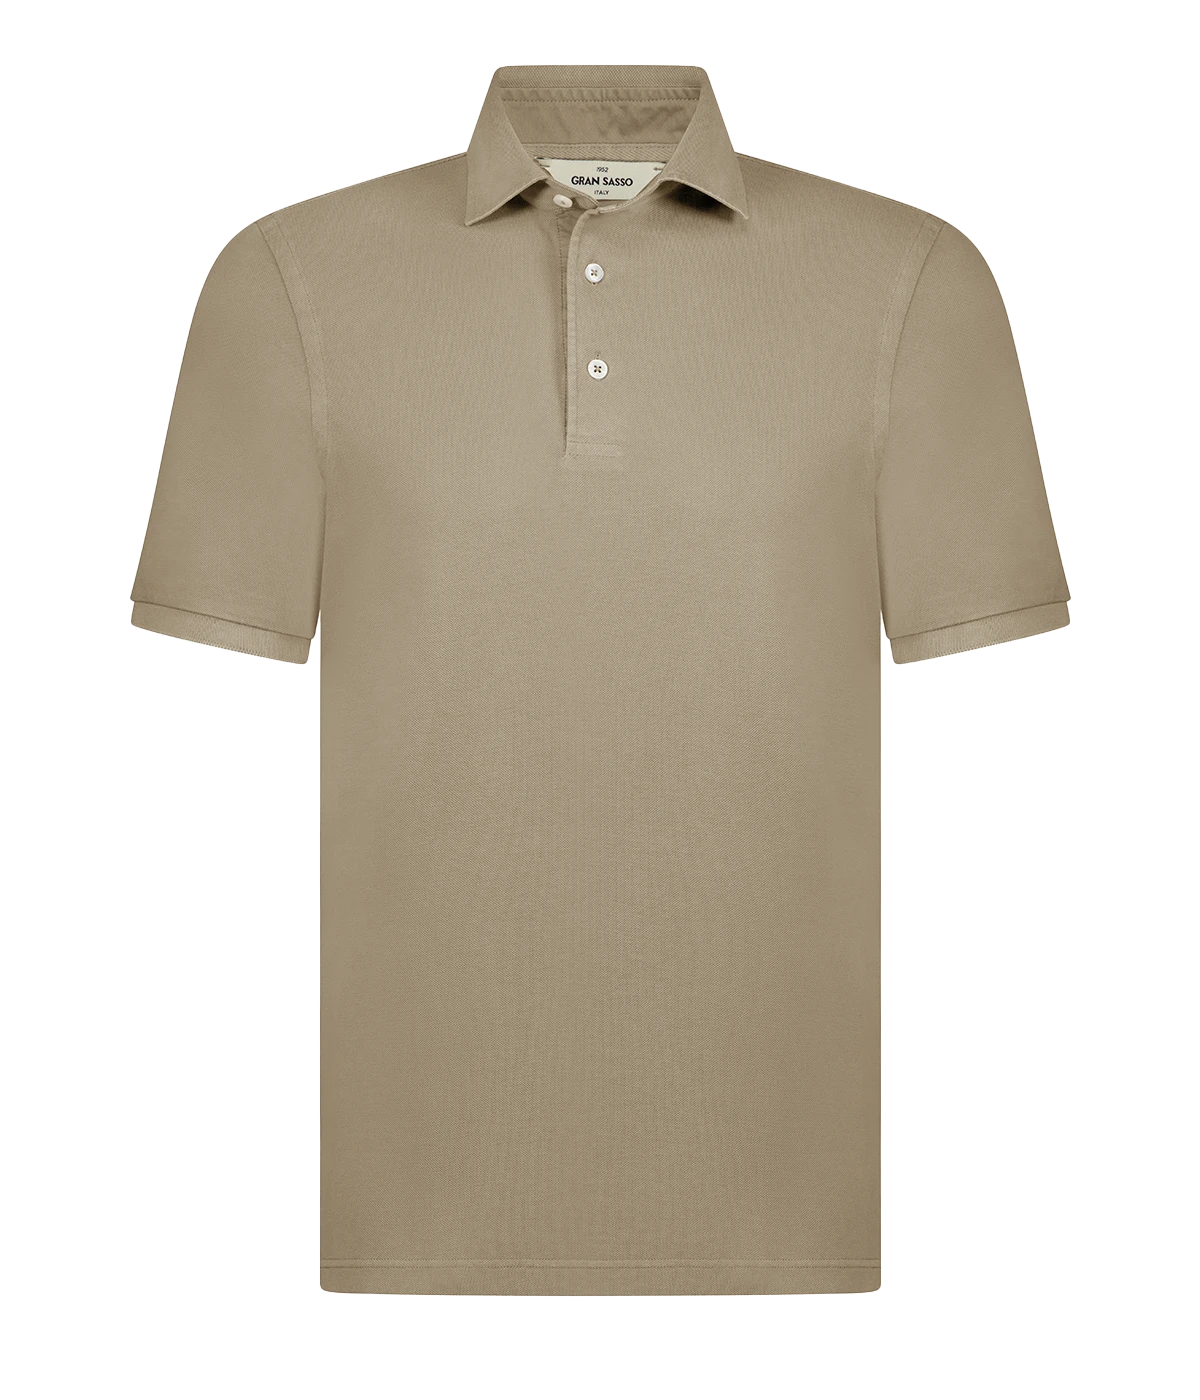 A timeless classic short sleeve polo in a camel, featuring a light weight cotton material, three button detail and collar. Sporty Polo, comfortable, made in Italy, throw on and go. 